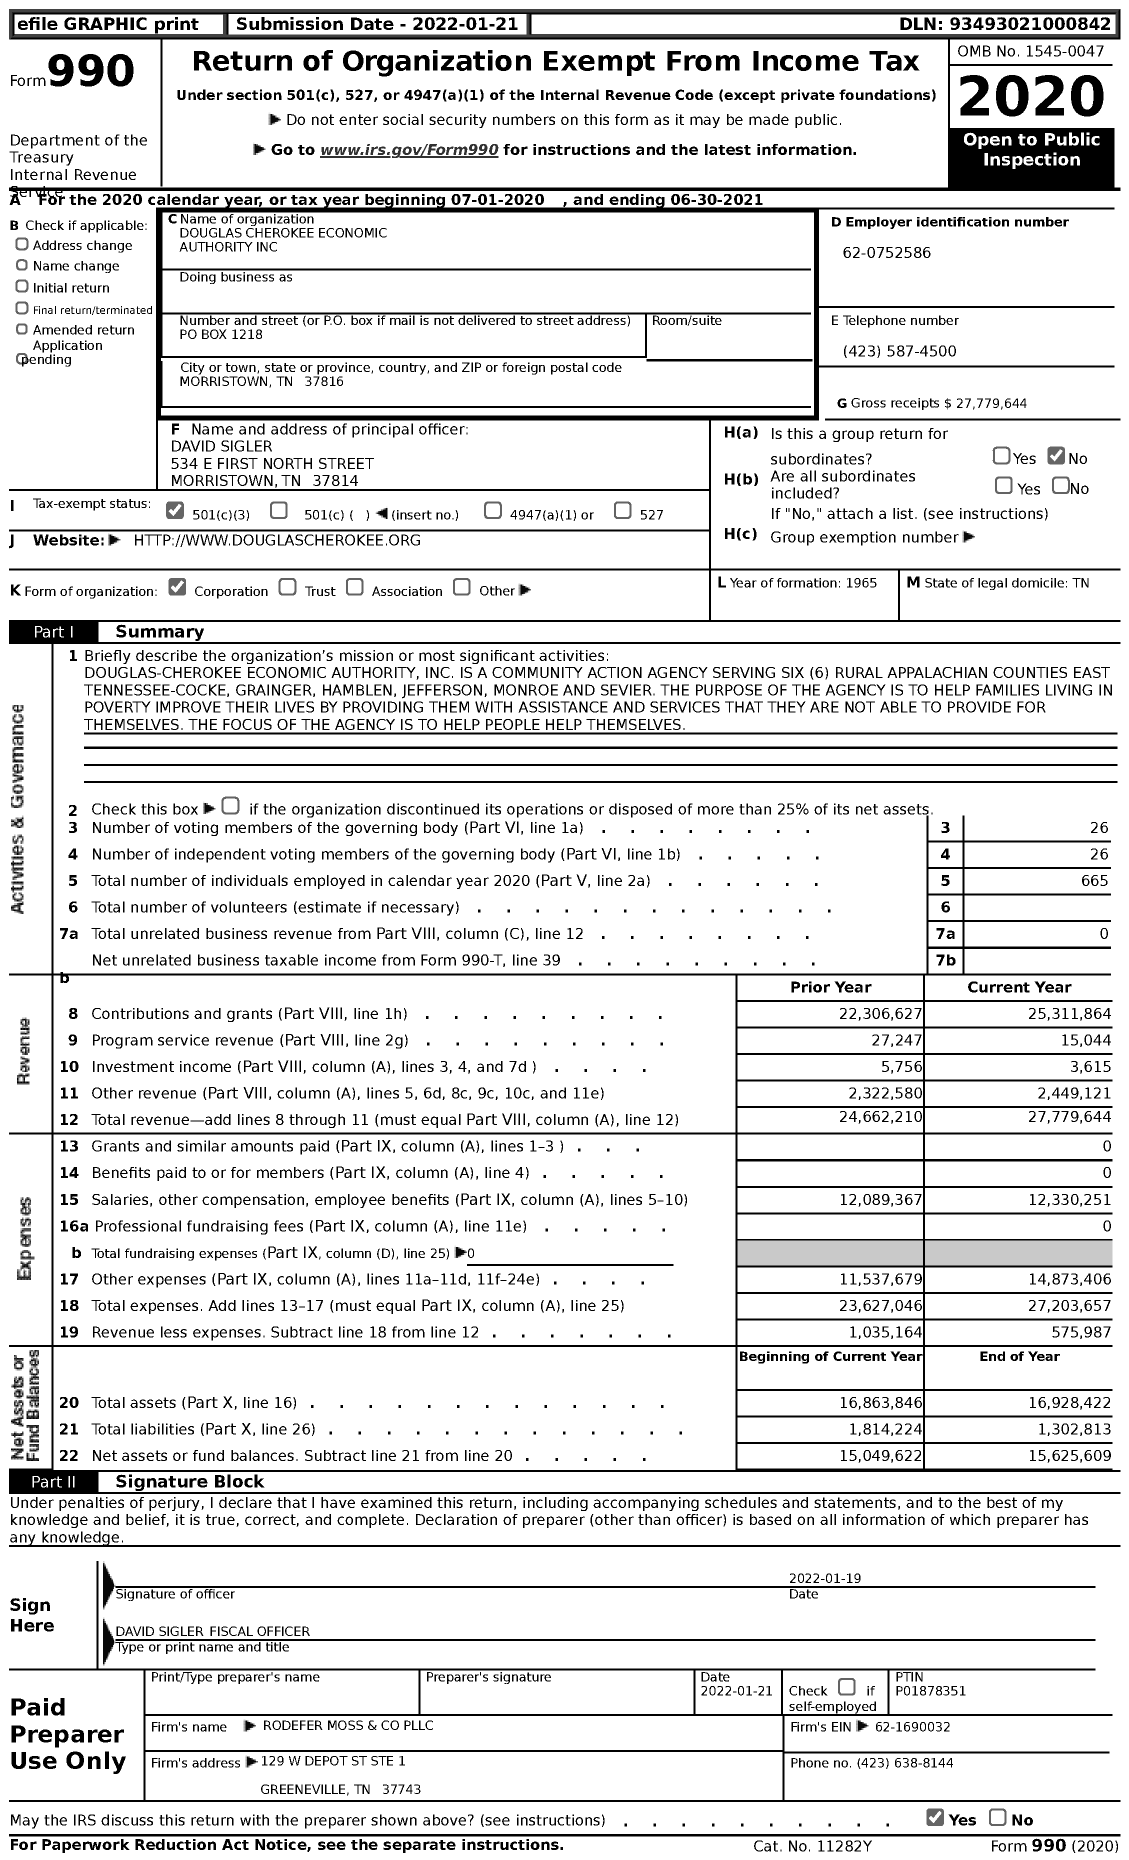 Image of first page of 2020 Form 990 for Douglas Cherokee Economic Authority